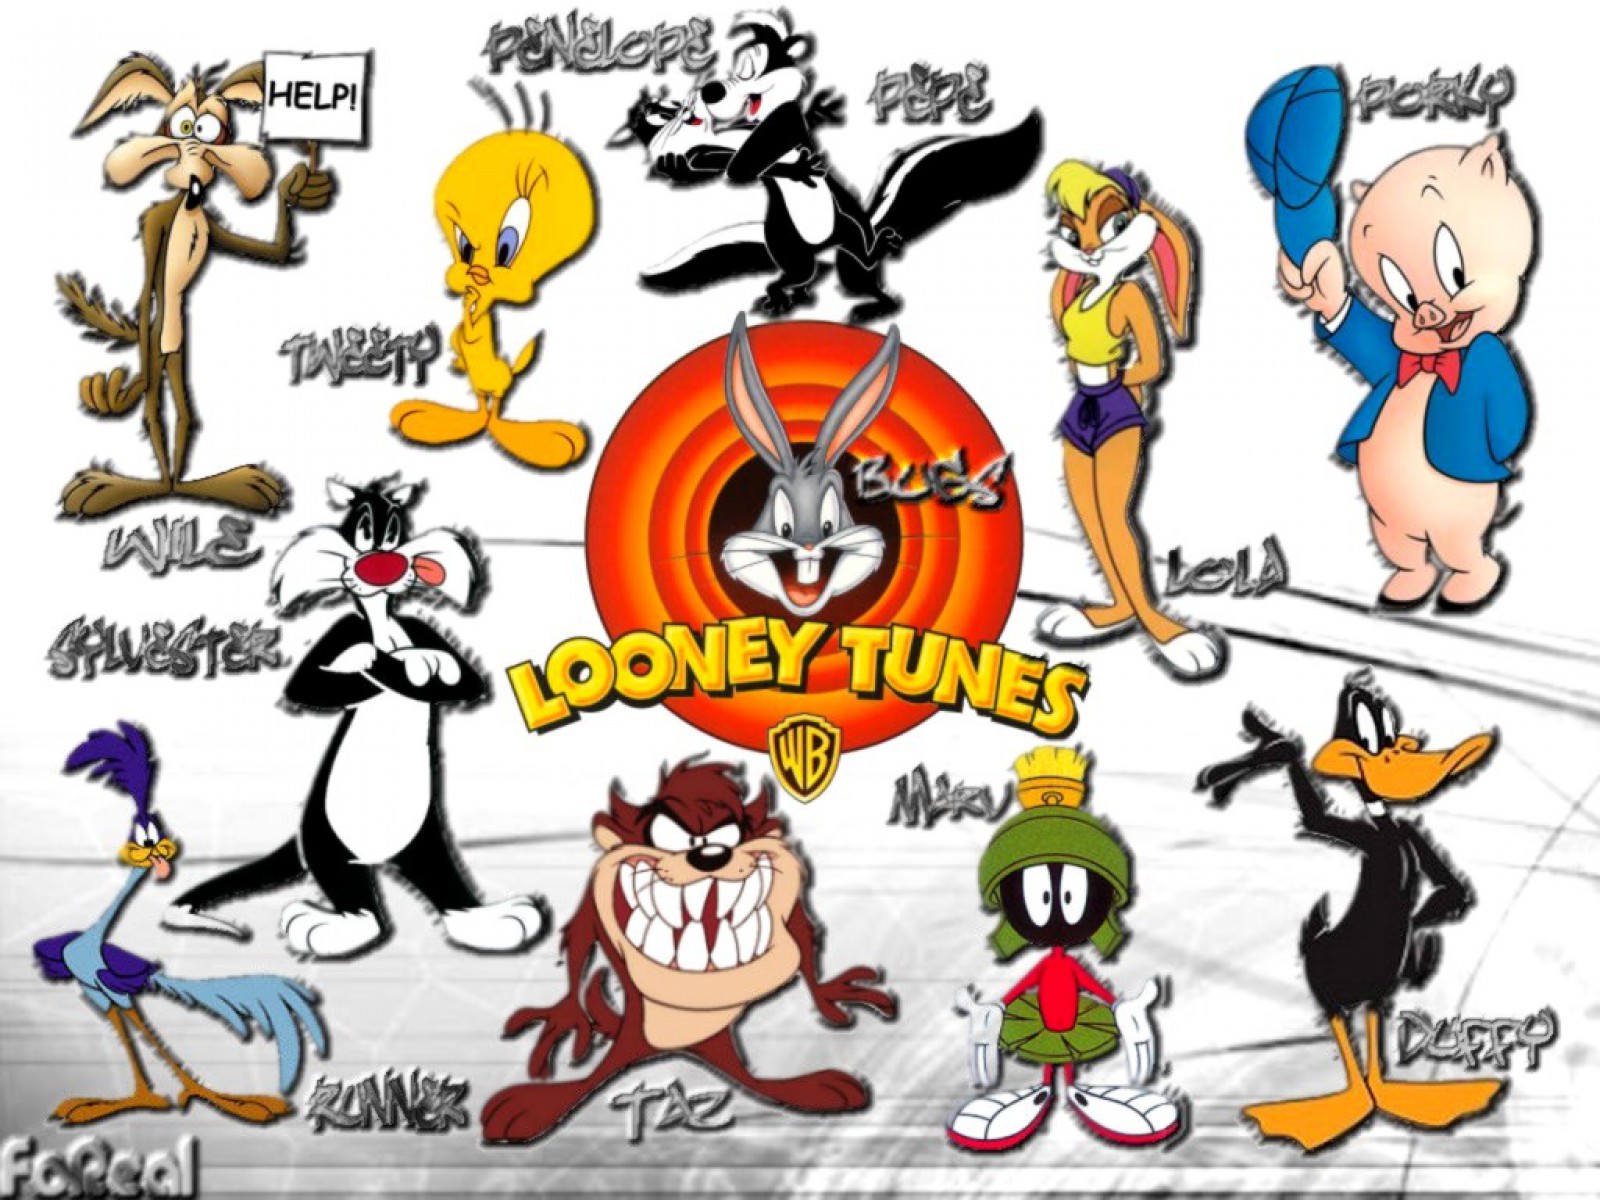 tv show, looney tunes, bugs bunny, collage, daffy duck, lola bunny, pepé le pew, porky pig, tasmanian devil (looney tunes), tweety, wile e coyote